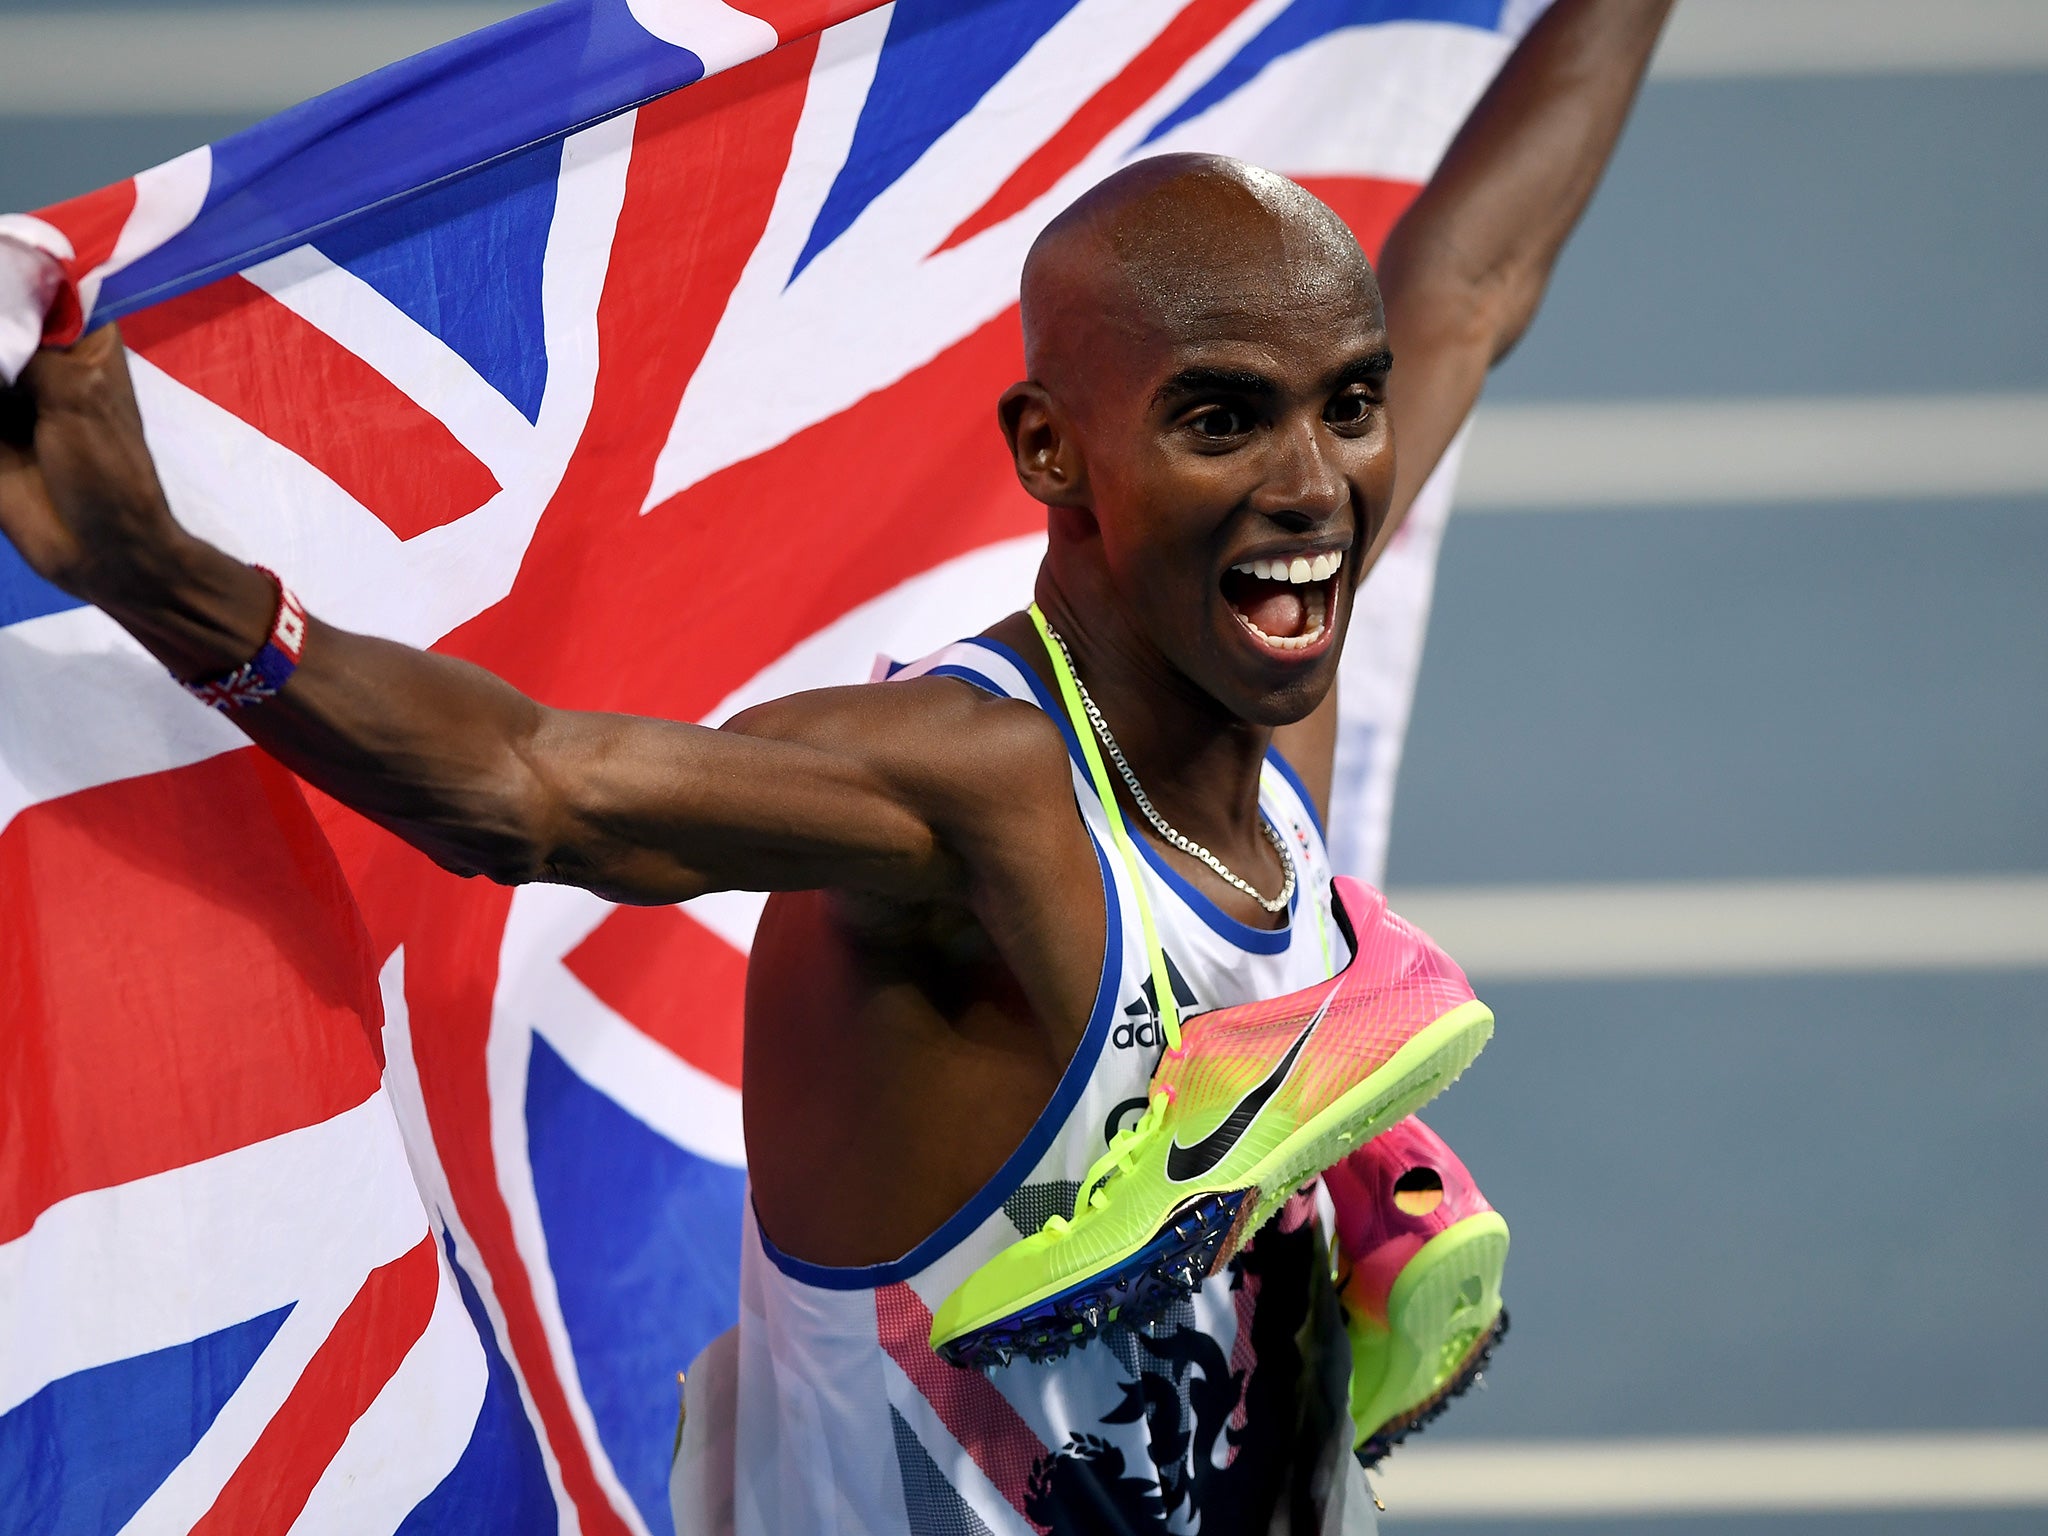 Mo Farah in a Facebook post over the weekend voiced his concern over Mr Trump’s policies